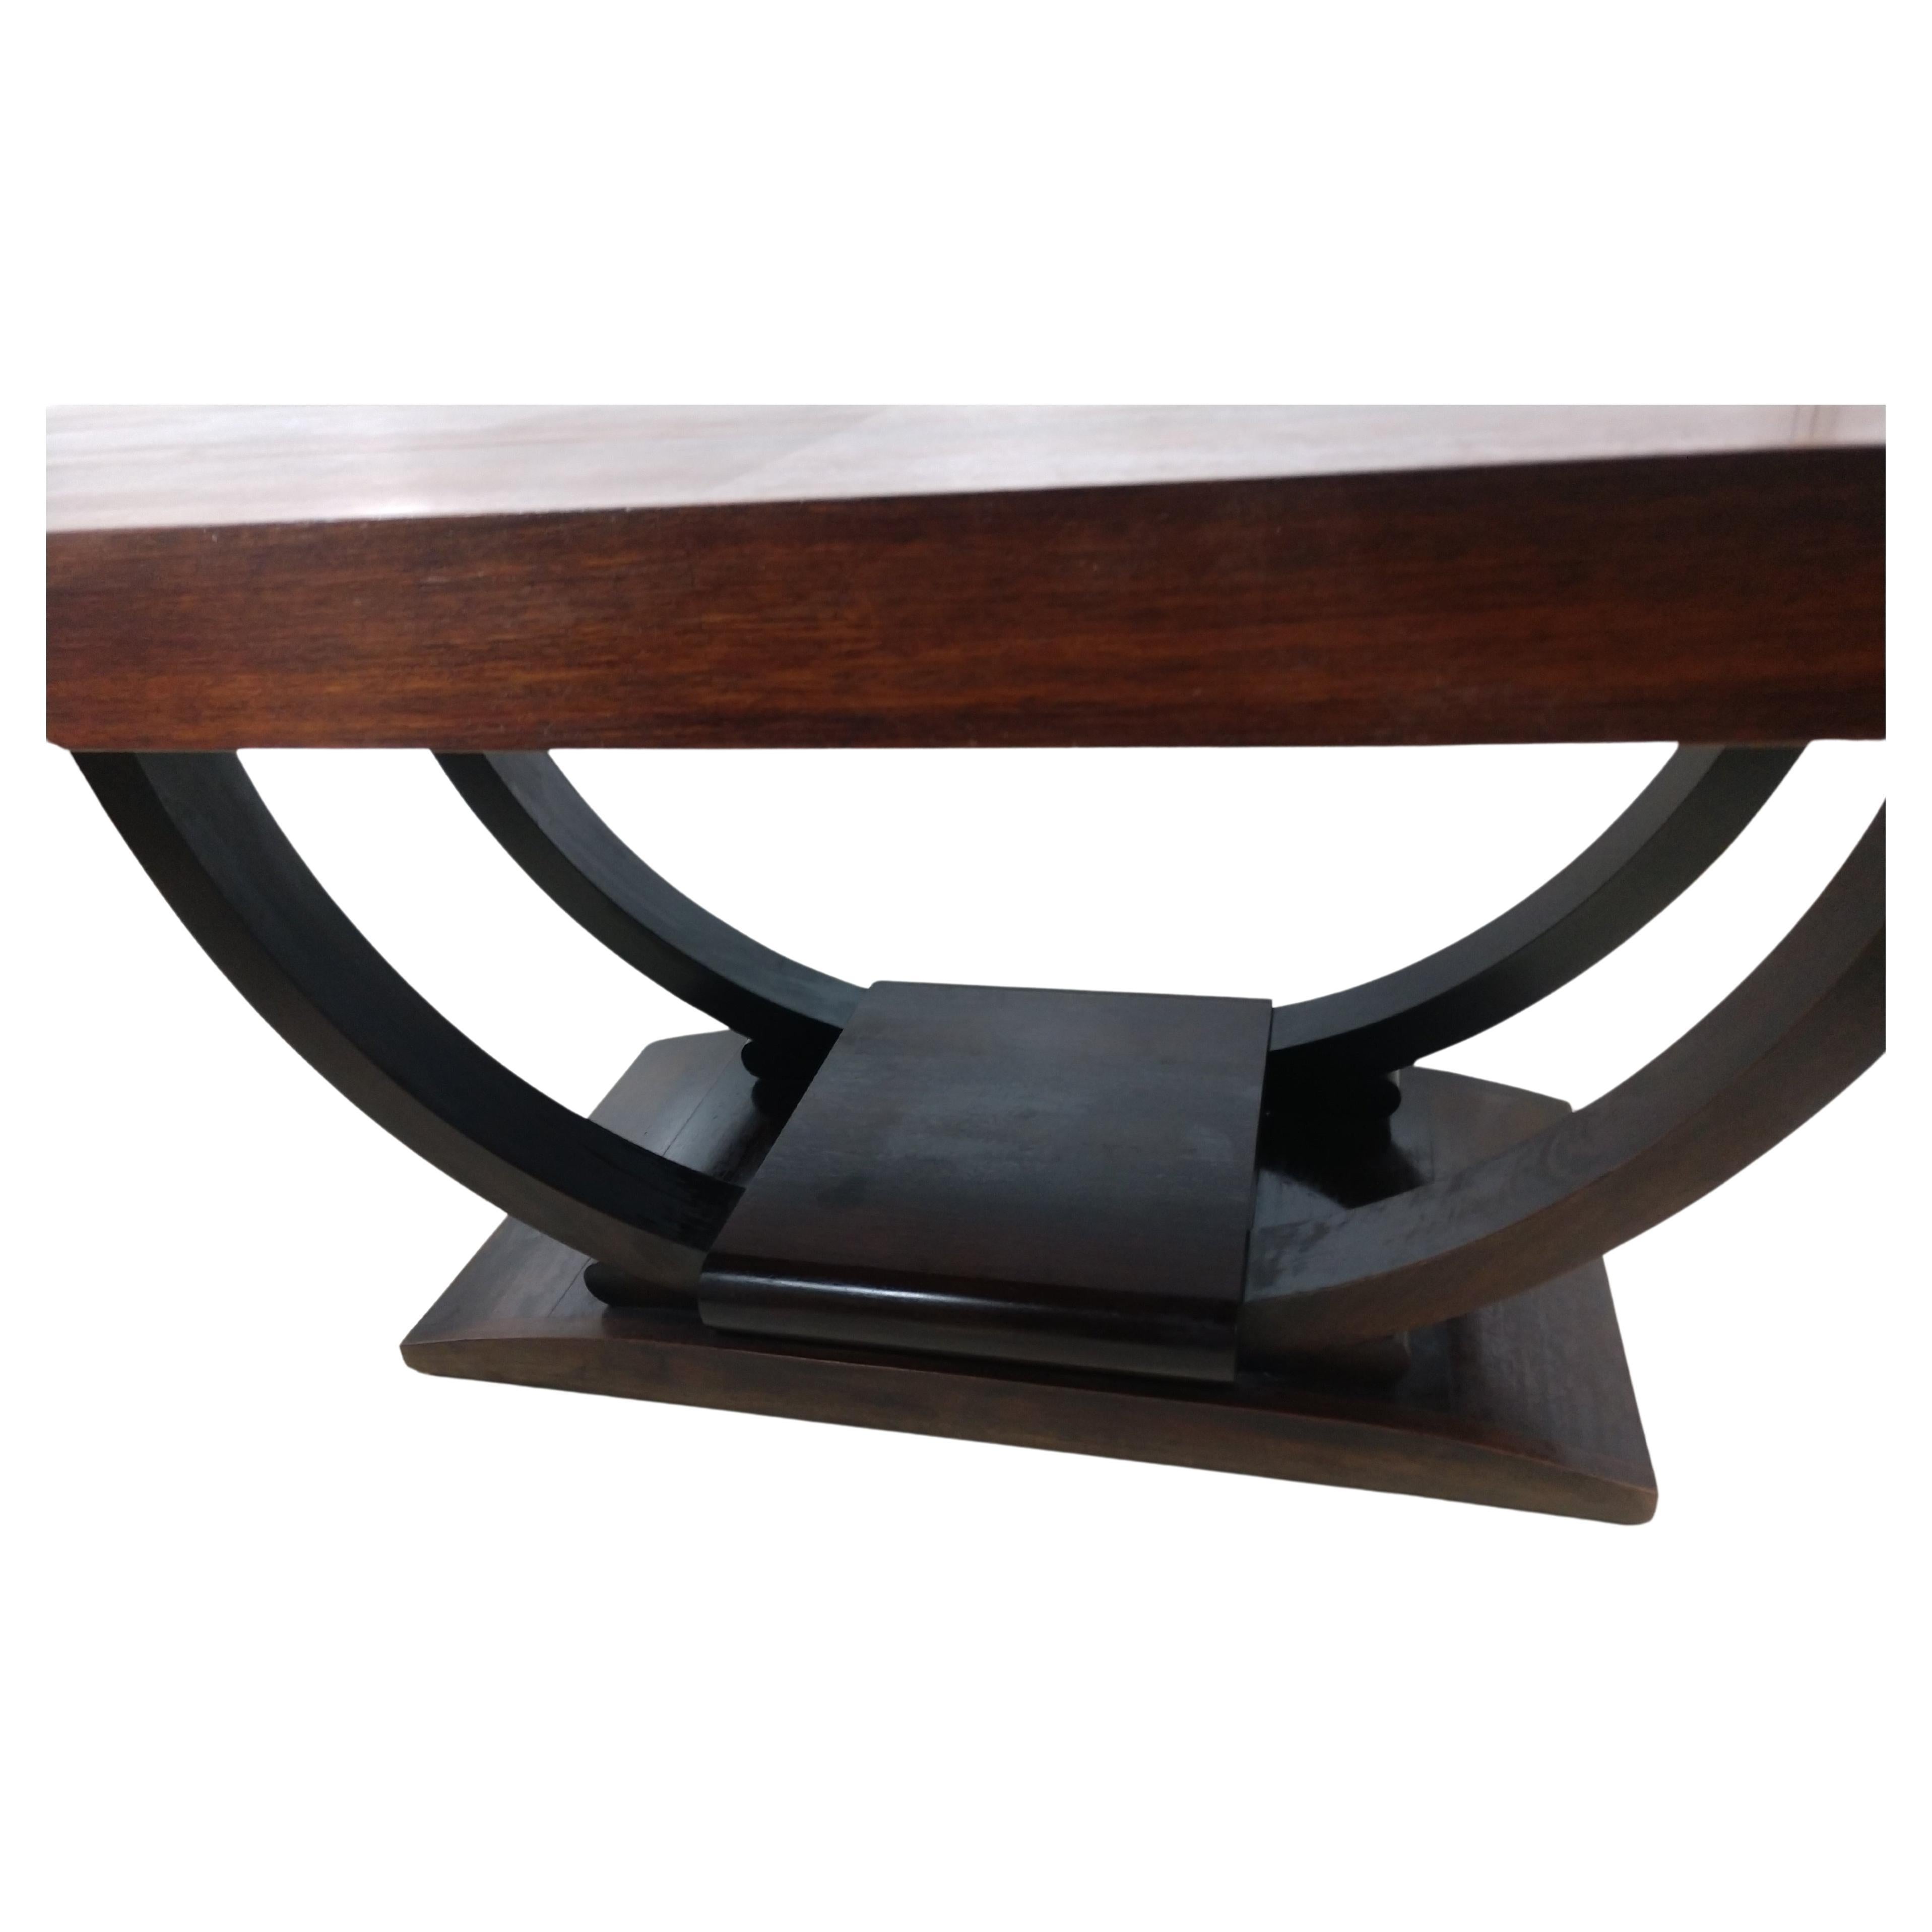 Stained Art Deco Custom Made Mid Century Rosewood Dining Table & 2 Table Leaf Extensions For Sale